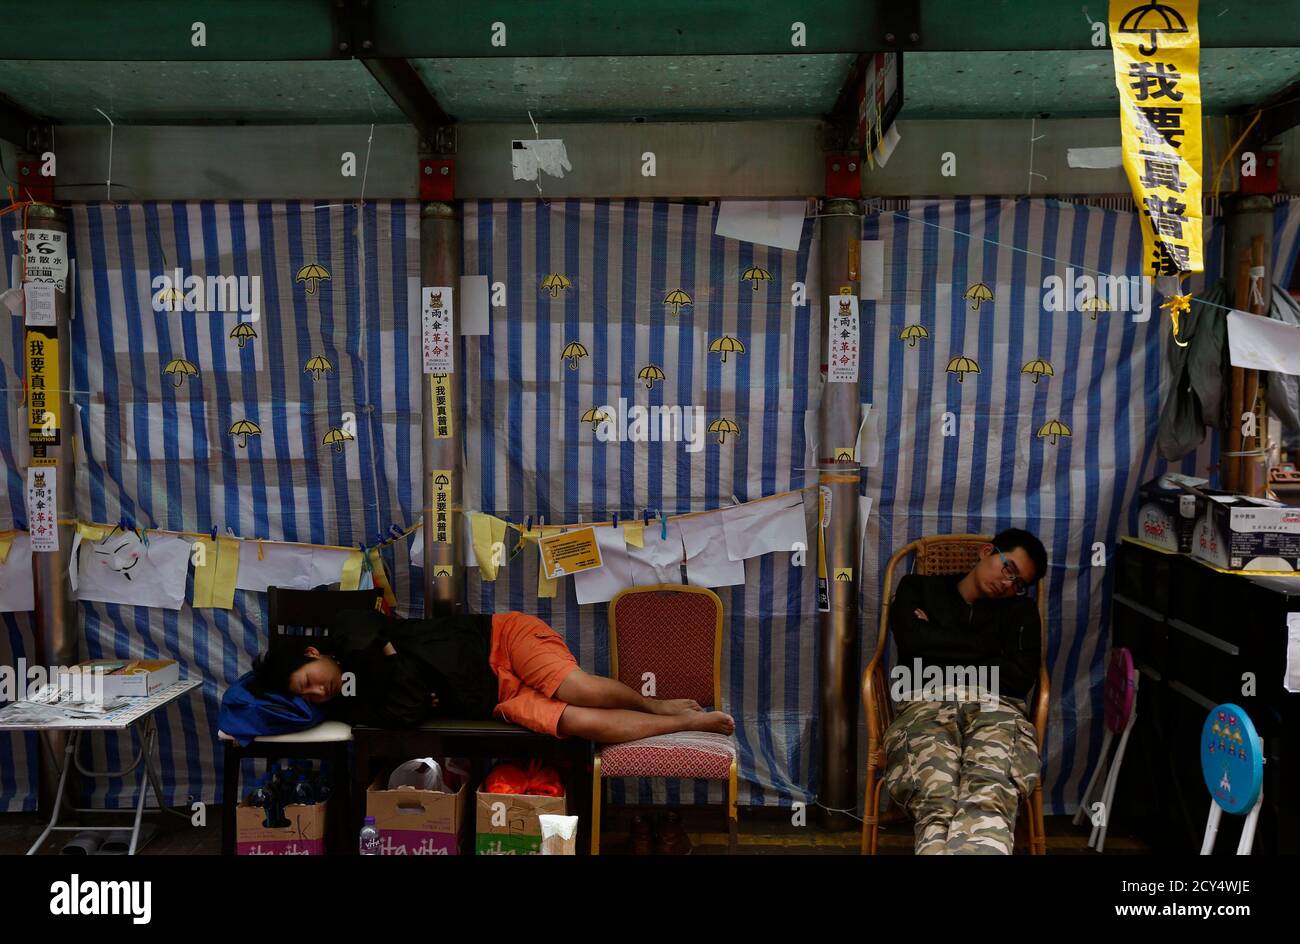 Pro-democracy protesters sleep at a bus stop on the blocked Nathan Road as part of the Occupy Central civil disobedience movement at Mongkok shopping district in Hong Kong November 12, 2014. Hong Kong's acting chief executive on Tuesday called on pro-democracy protesters to clear sites they have occupied for more than six weeks and warned holdouts they could face arrest, a move that could swell protest numbers. The banner on top right reads 'I want real universal suffrage'.     REUTERS/Bobby Yip  (CHINA - Tags: POLITICS CIVIL UNREST) Stock Photo